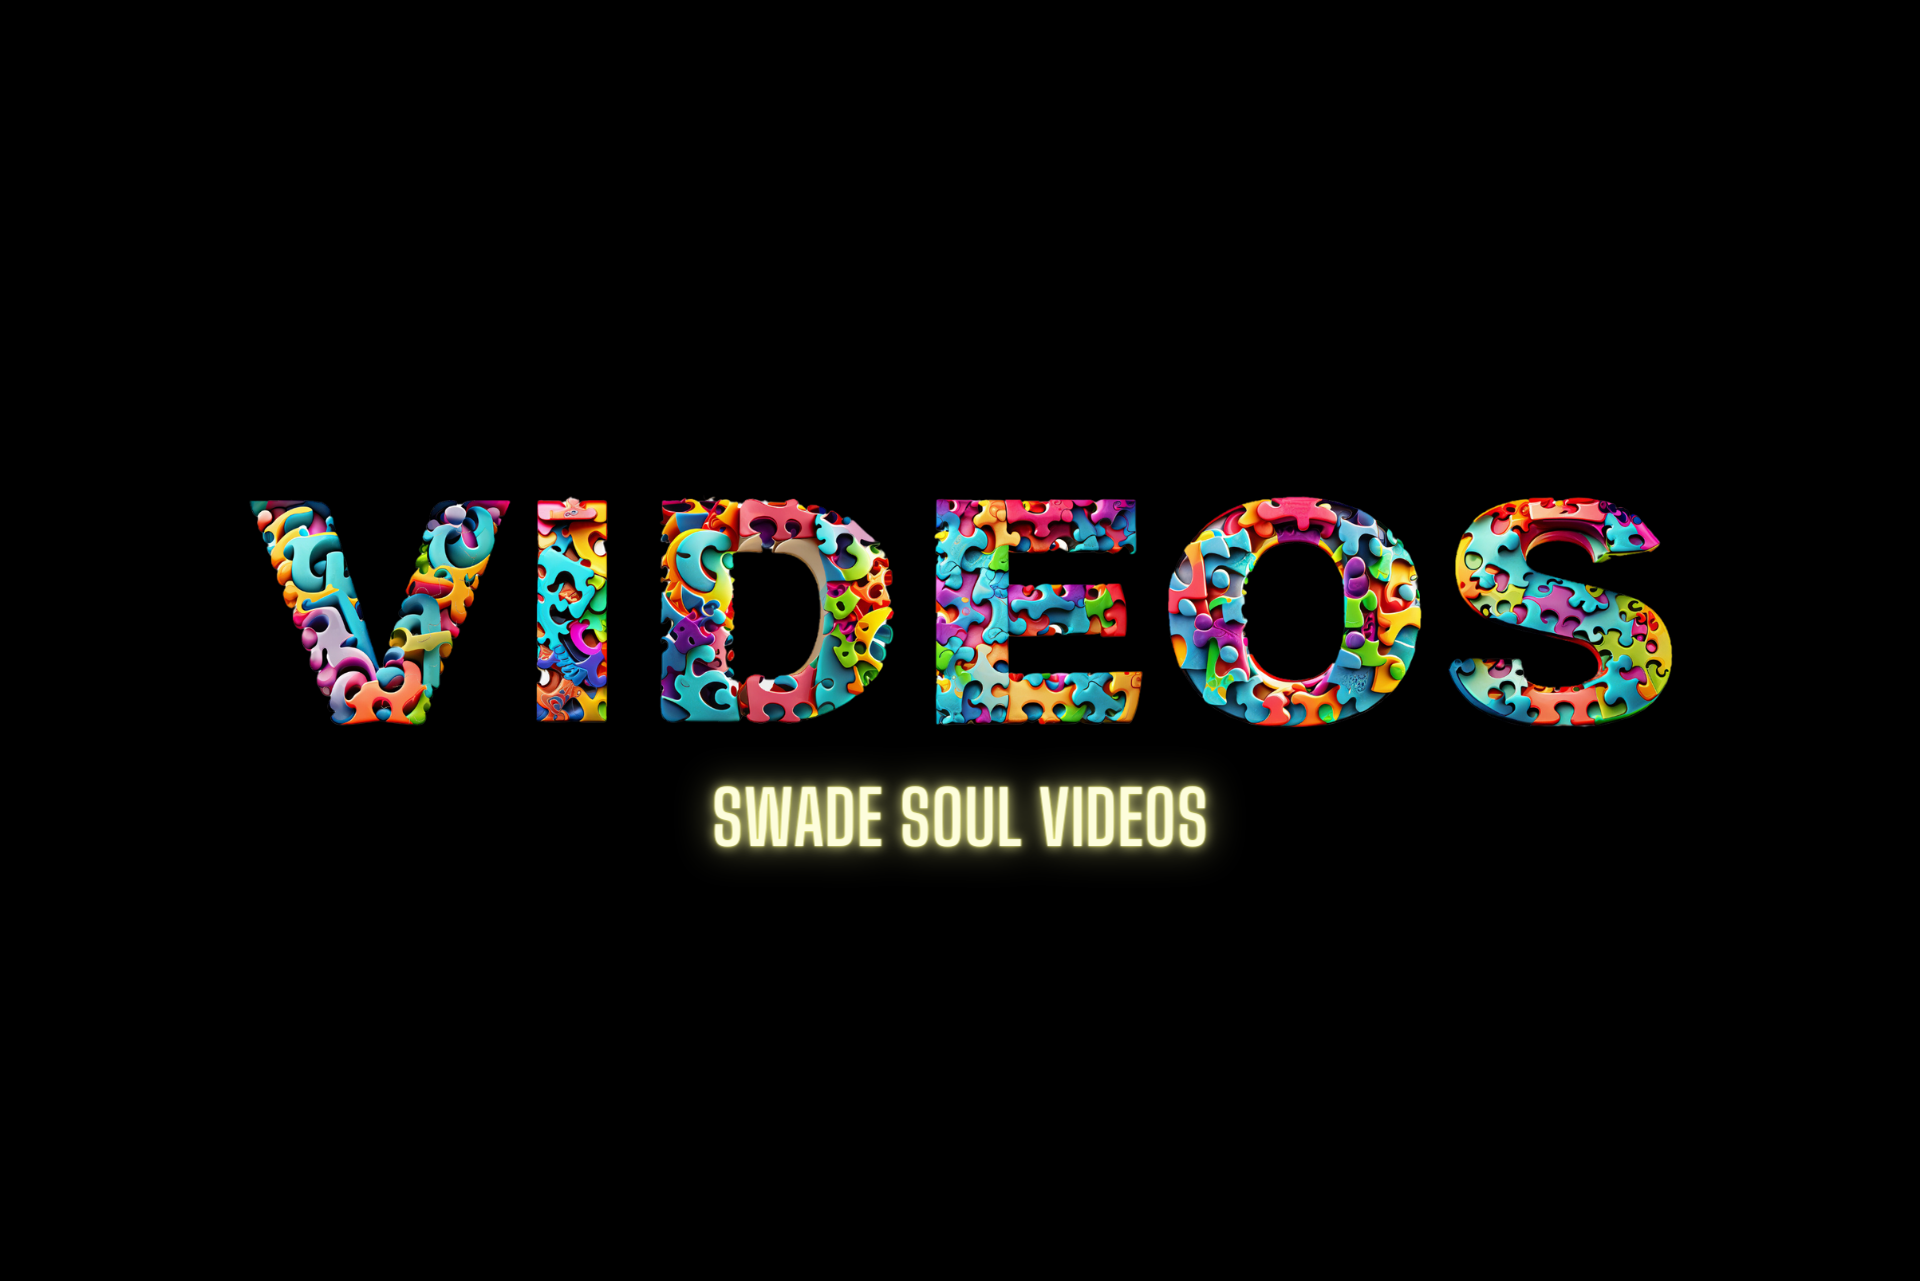 the word videos is written in colorful letters on a black background